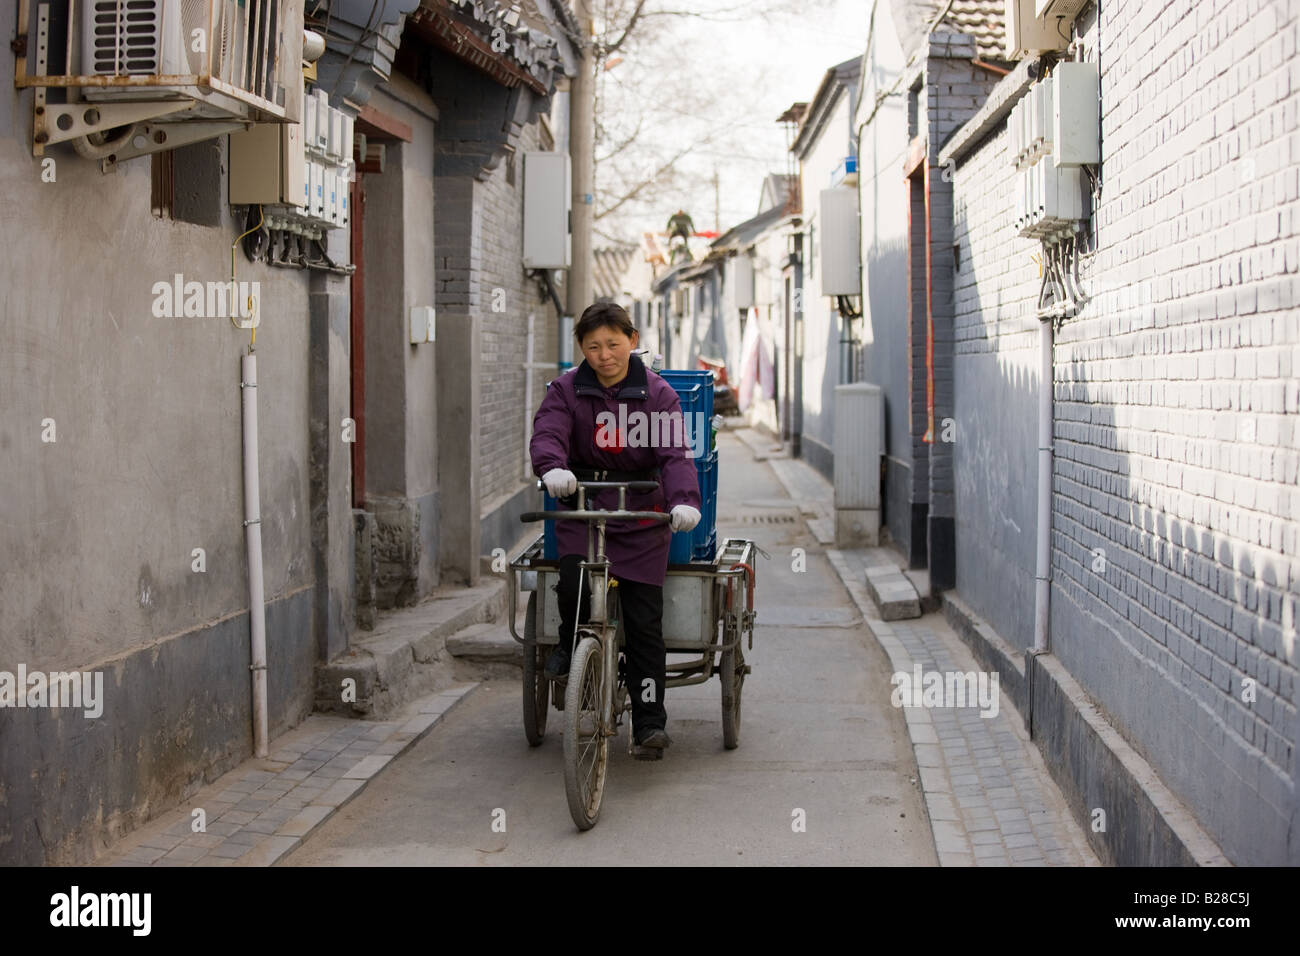 Woman delivering bottled beers on a tricycle cart Hutongs area Beijing China Stock Photo